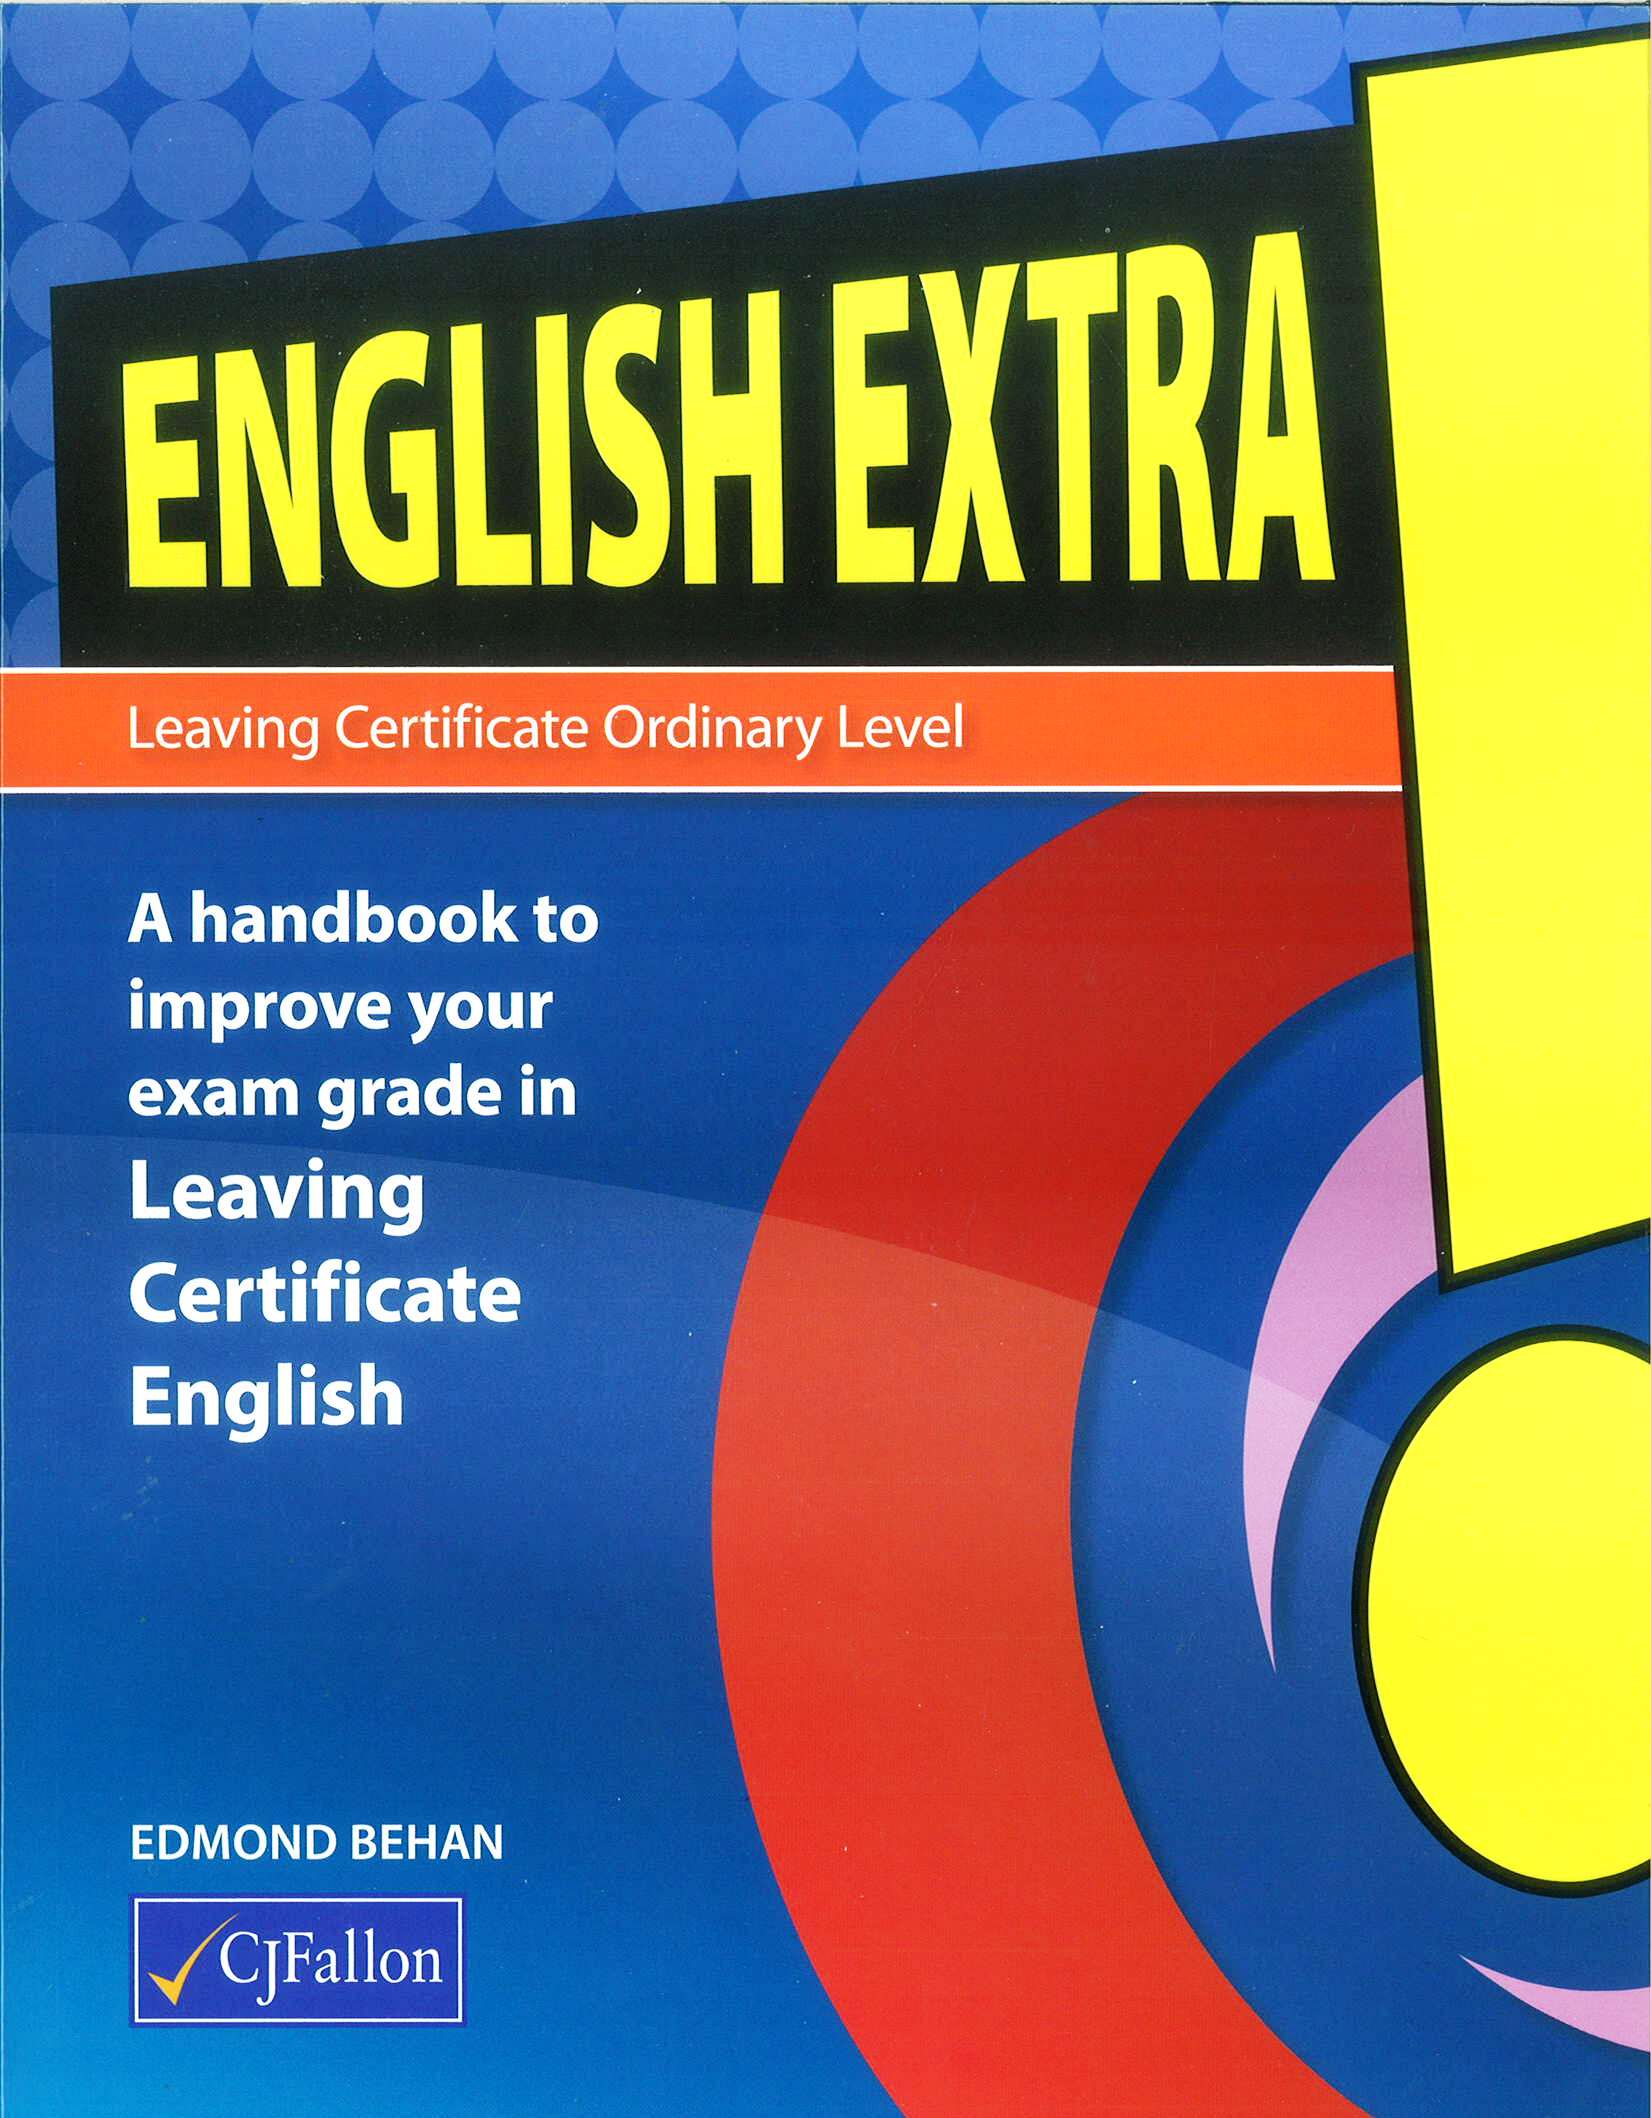 english-extra-leaving-certificate-ordinary-level-a-handbook-to-improve-your-exam-grade-in